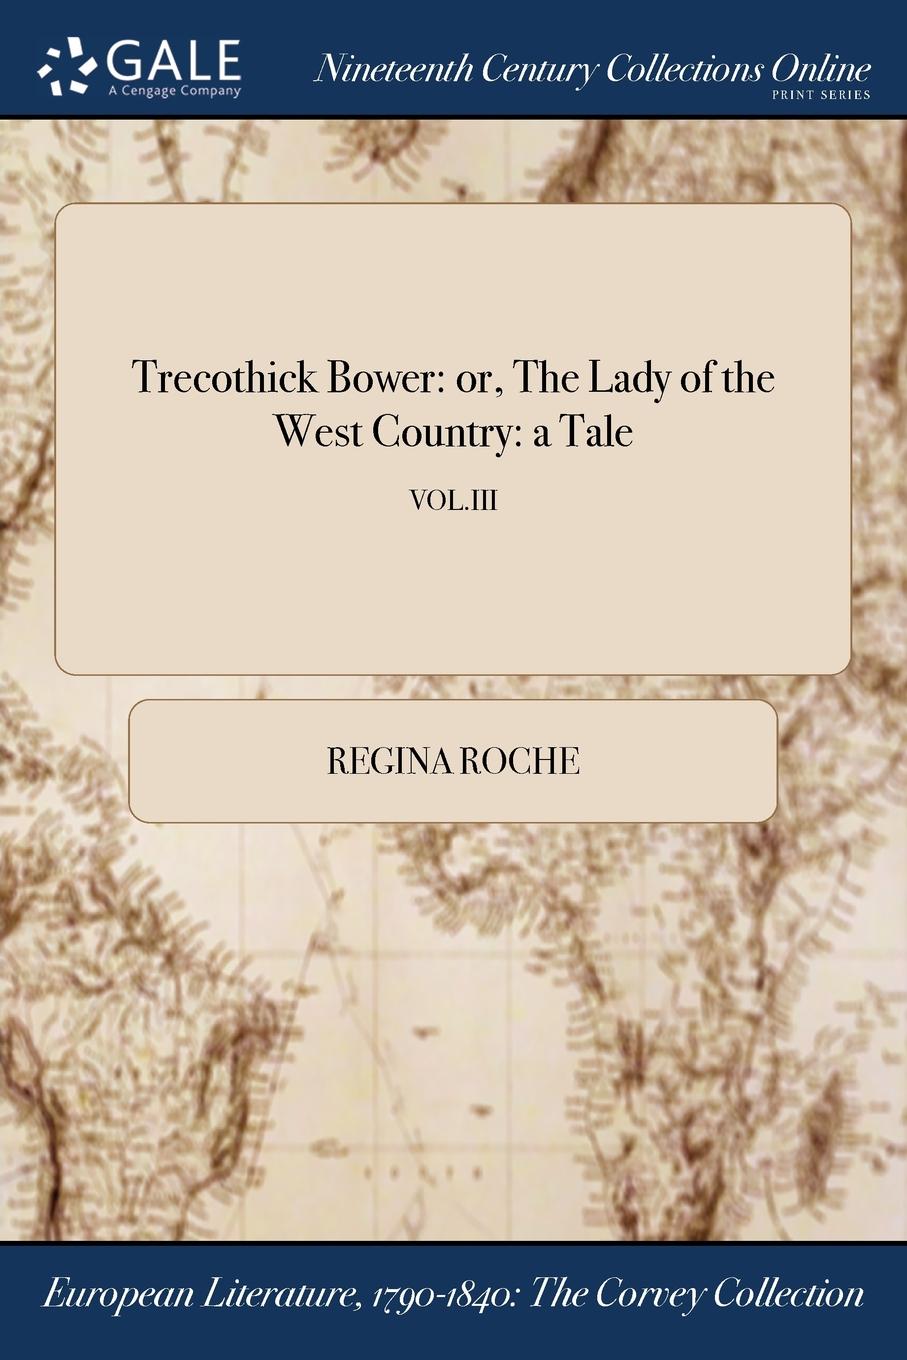 Trecothick Bower. or, The Lady of the West Country: a Tale; VOL.III